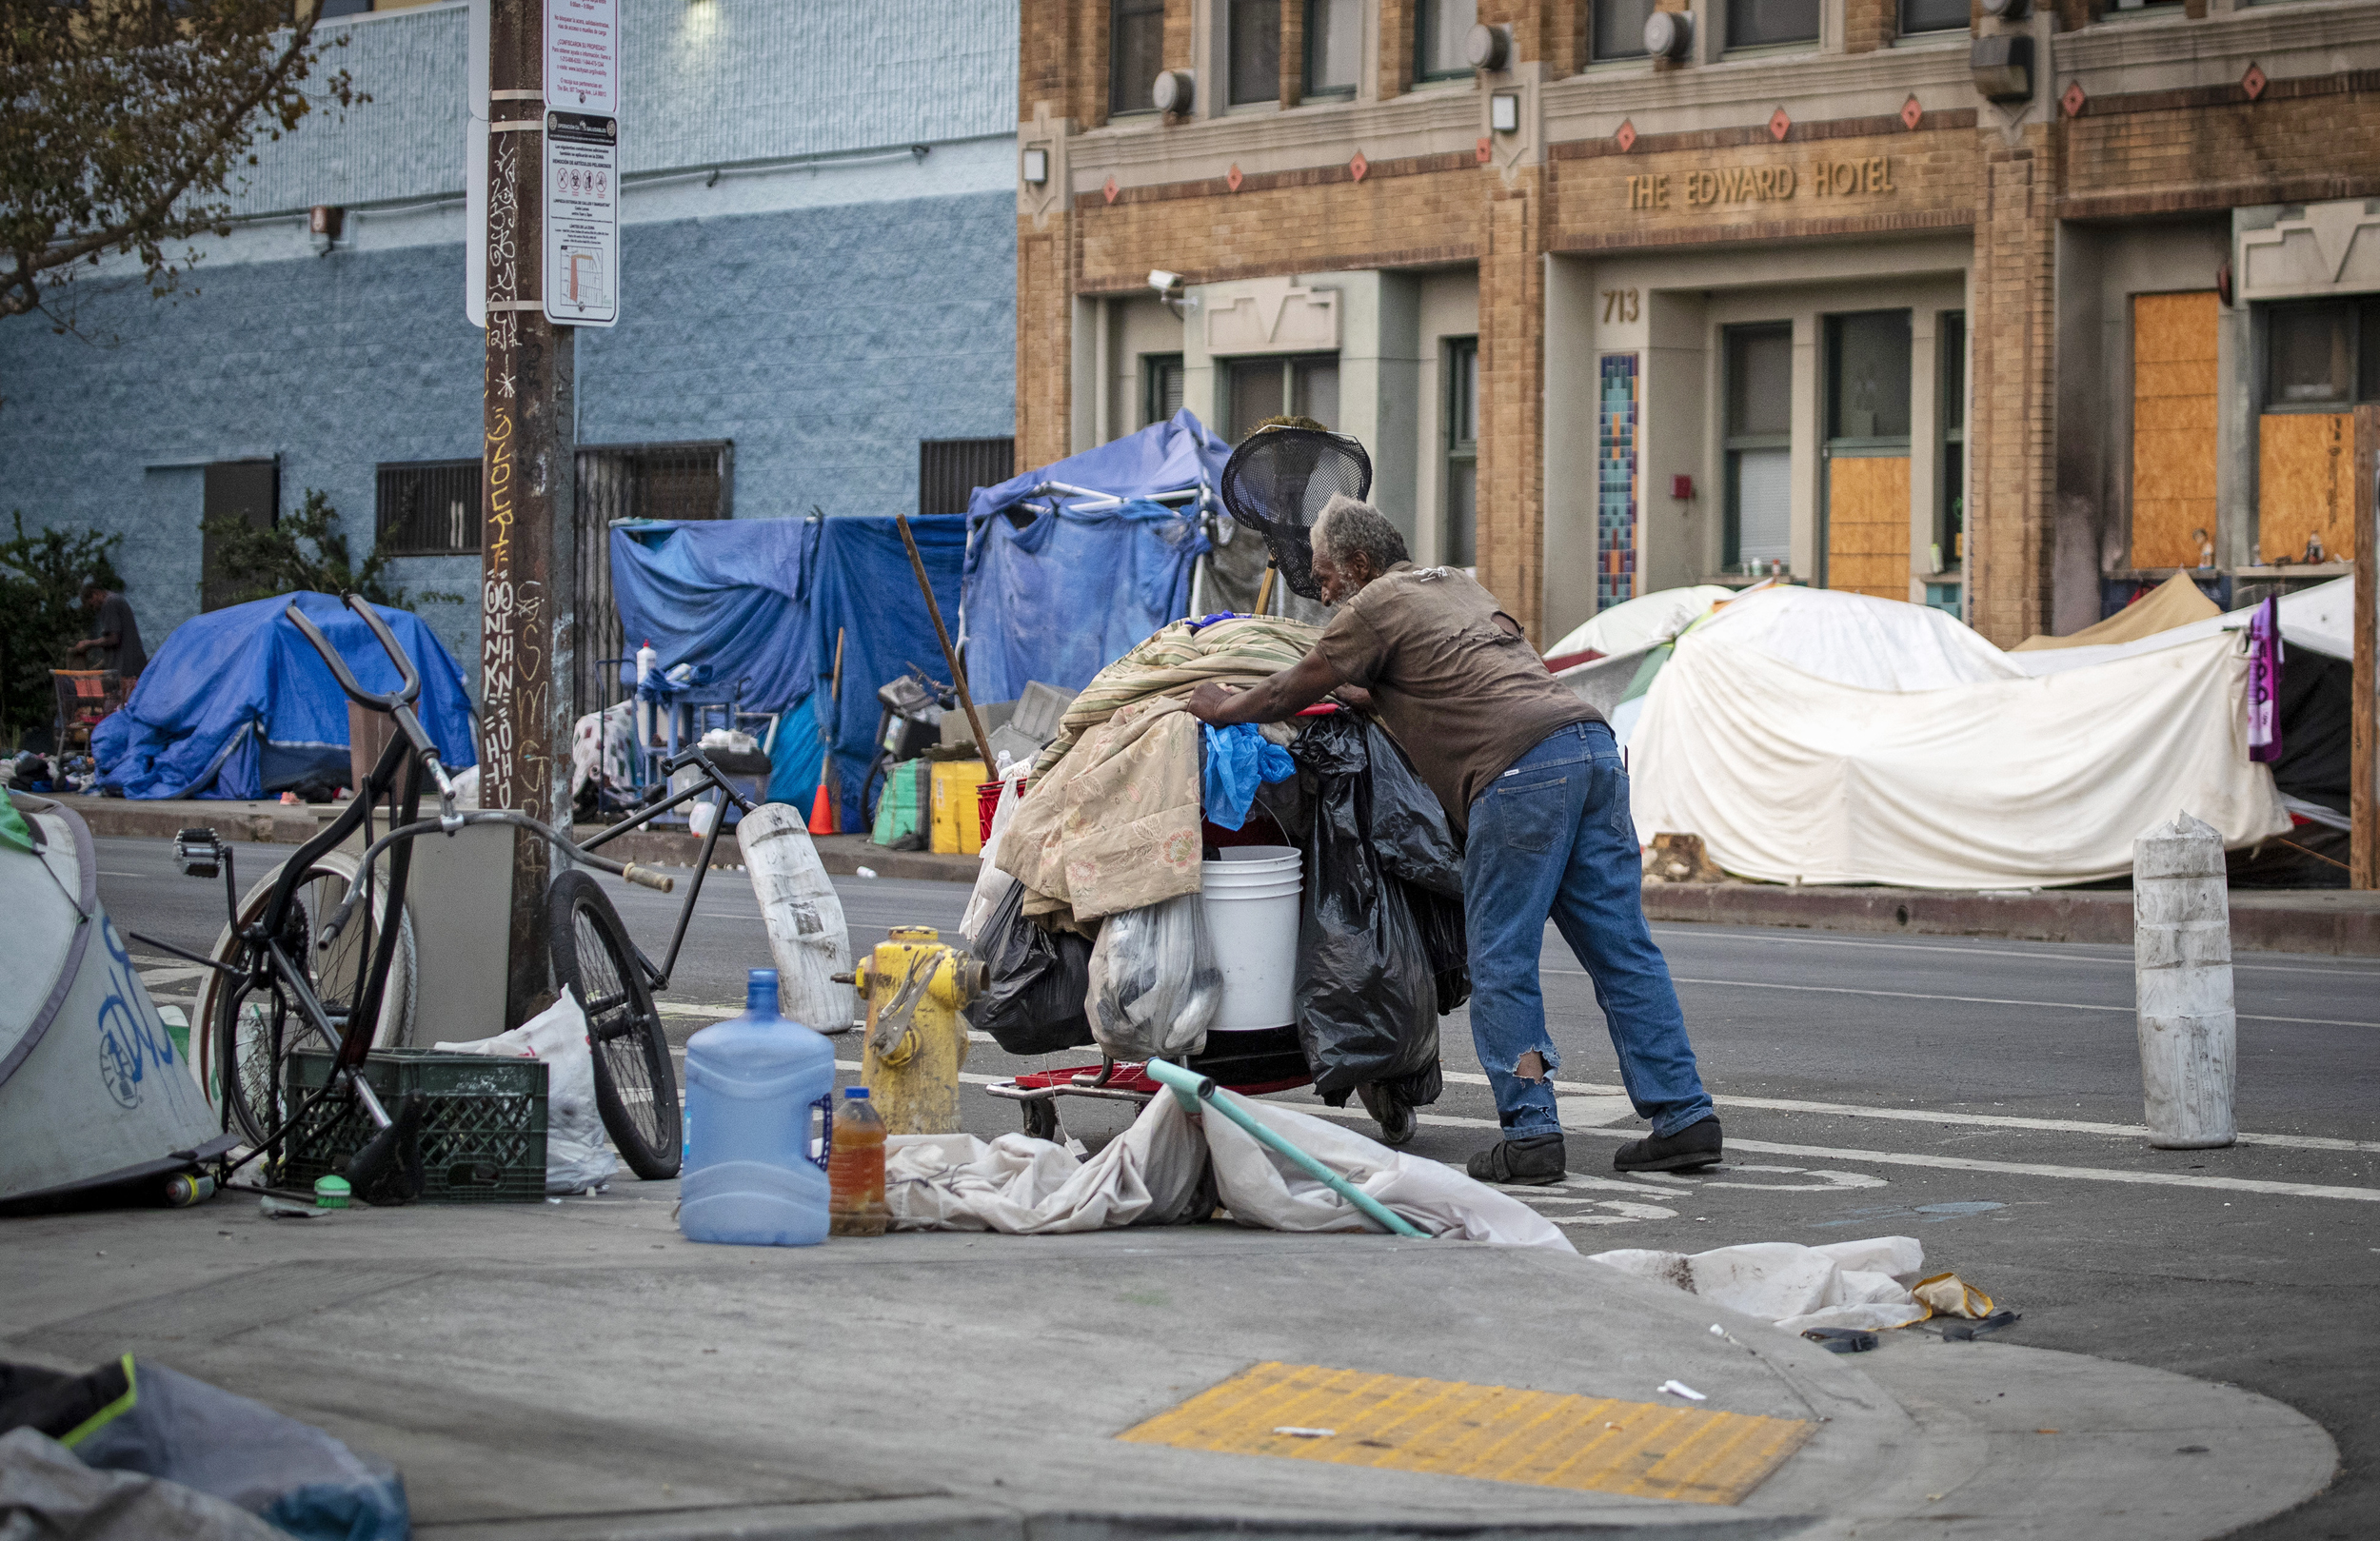 What caused the homeless crisis?